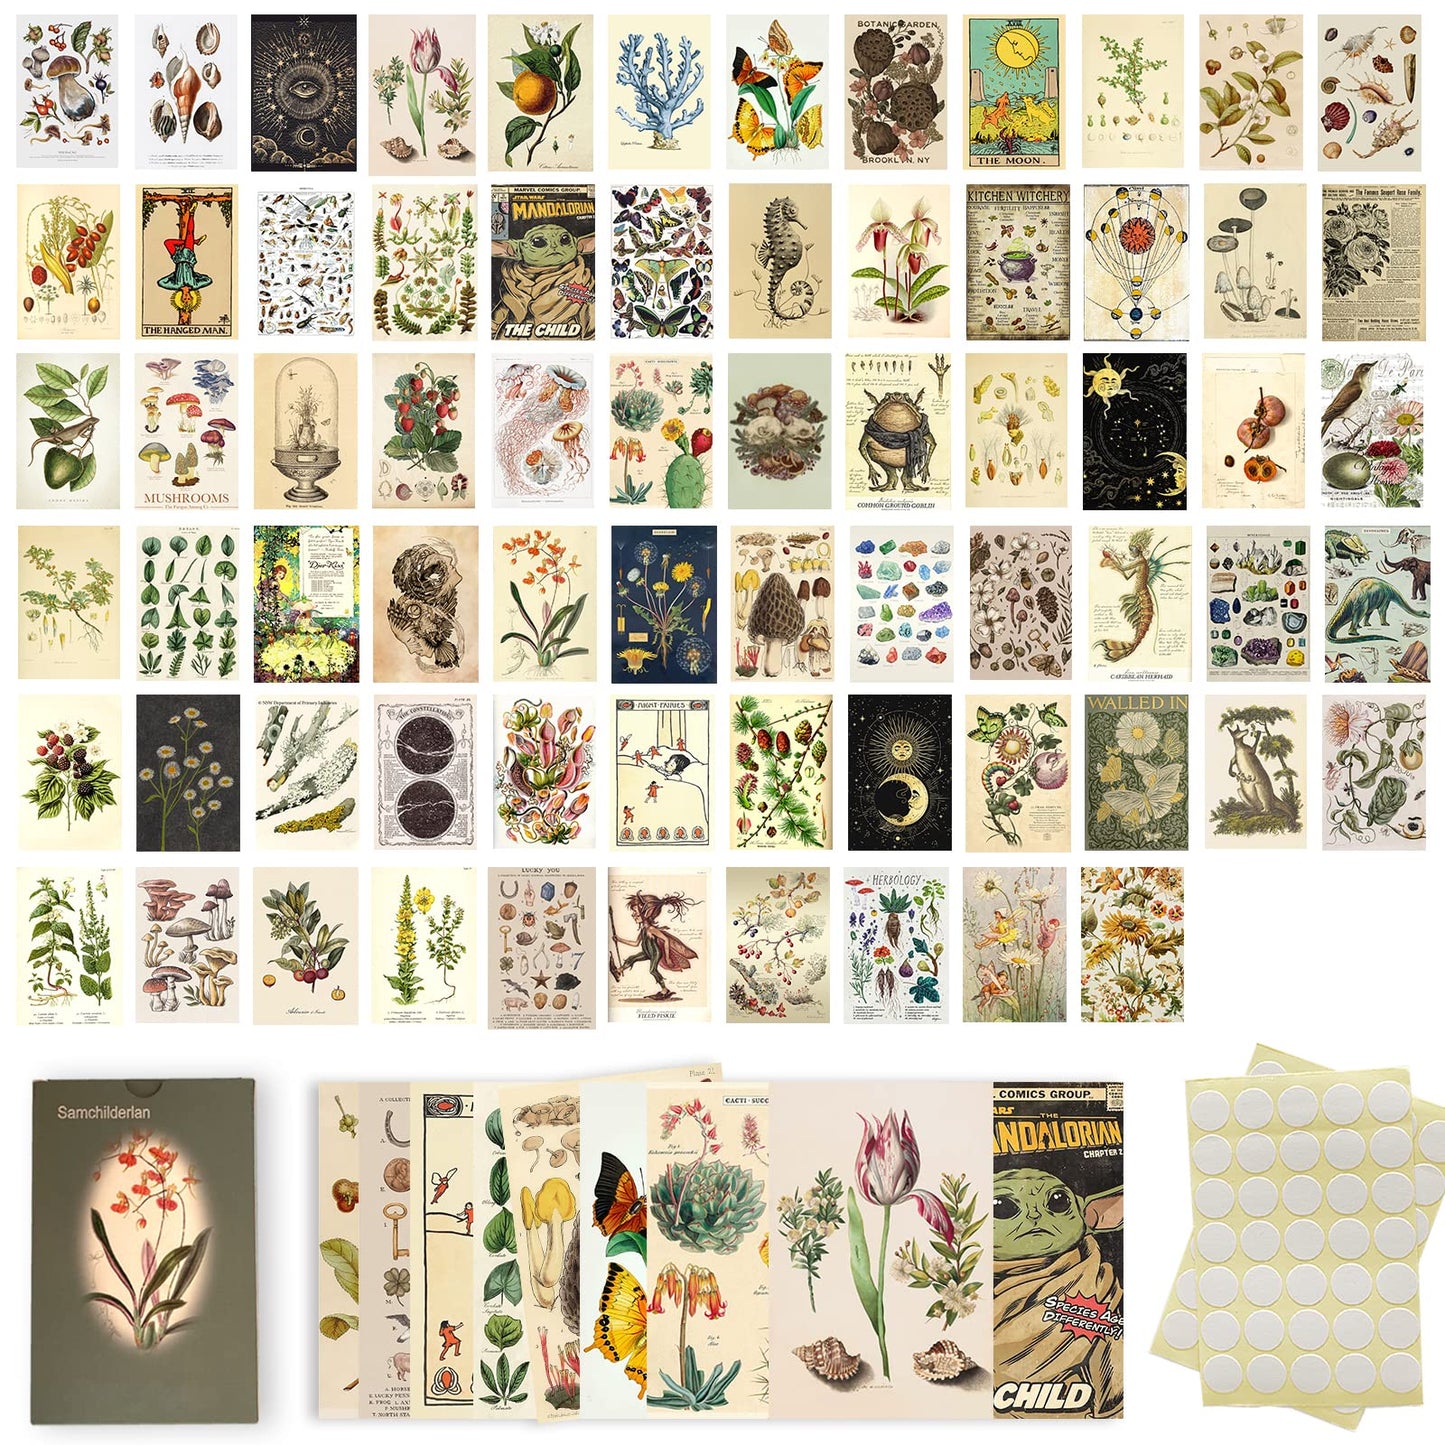 Vintage Botanical Room Decor Aesthetic Pictures Wall Collage Kit, Vintage Illustration Tarot Posters for Room Aesthetic, Cottagecore Wall Decor for Bedroom Dorm Aesthetic, Botanical Wall Art Prints